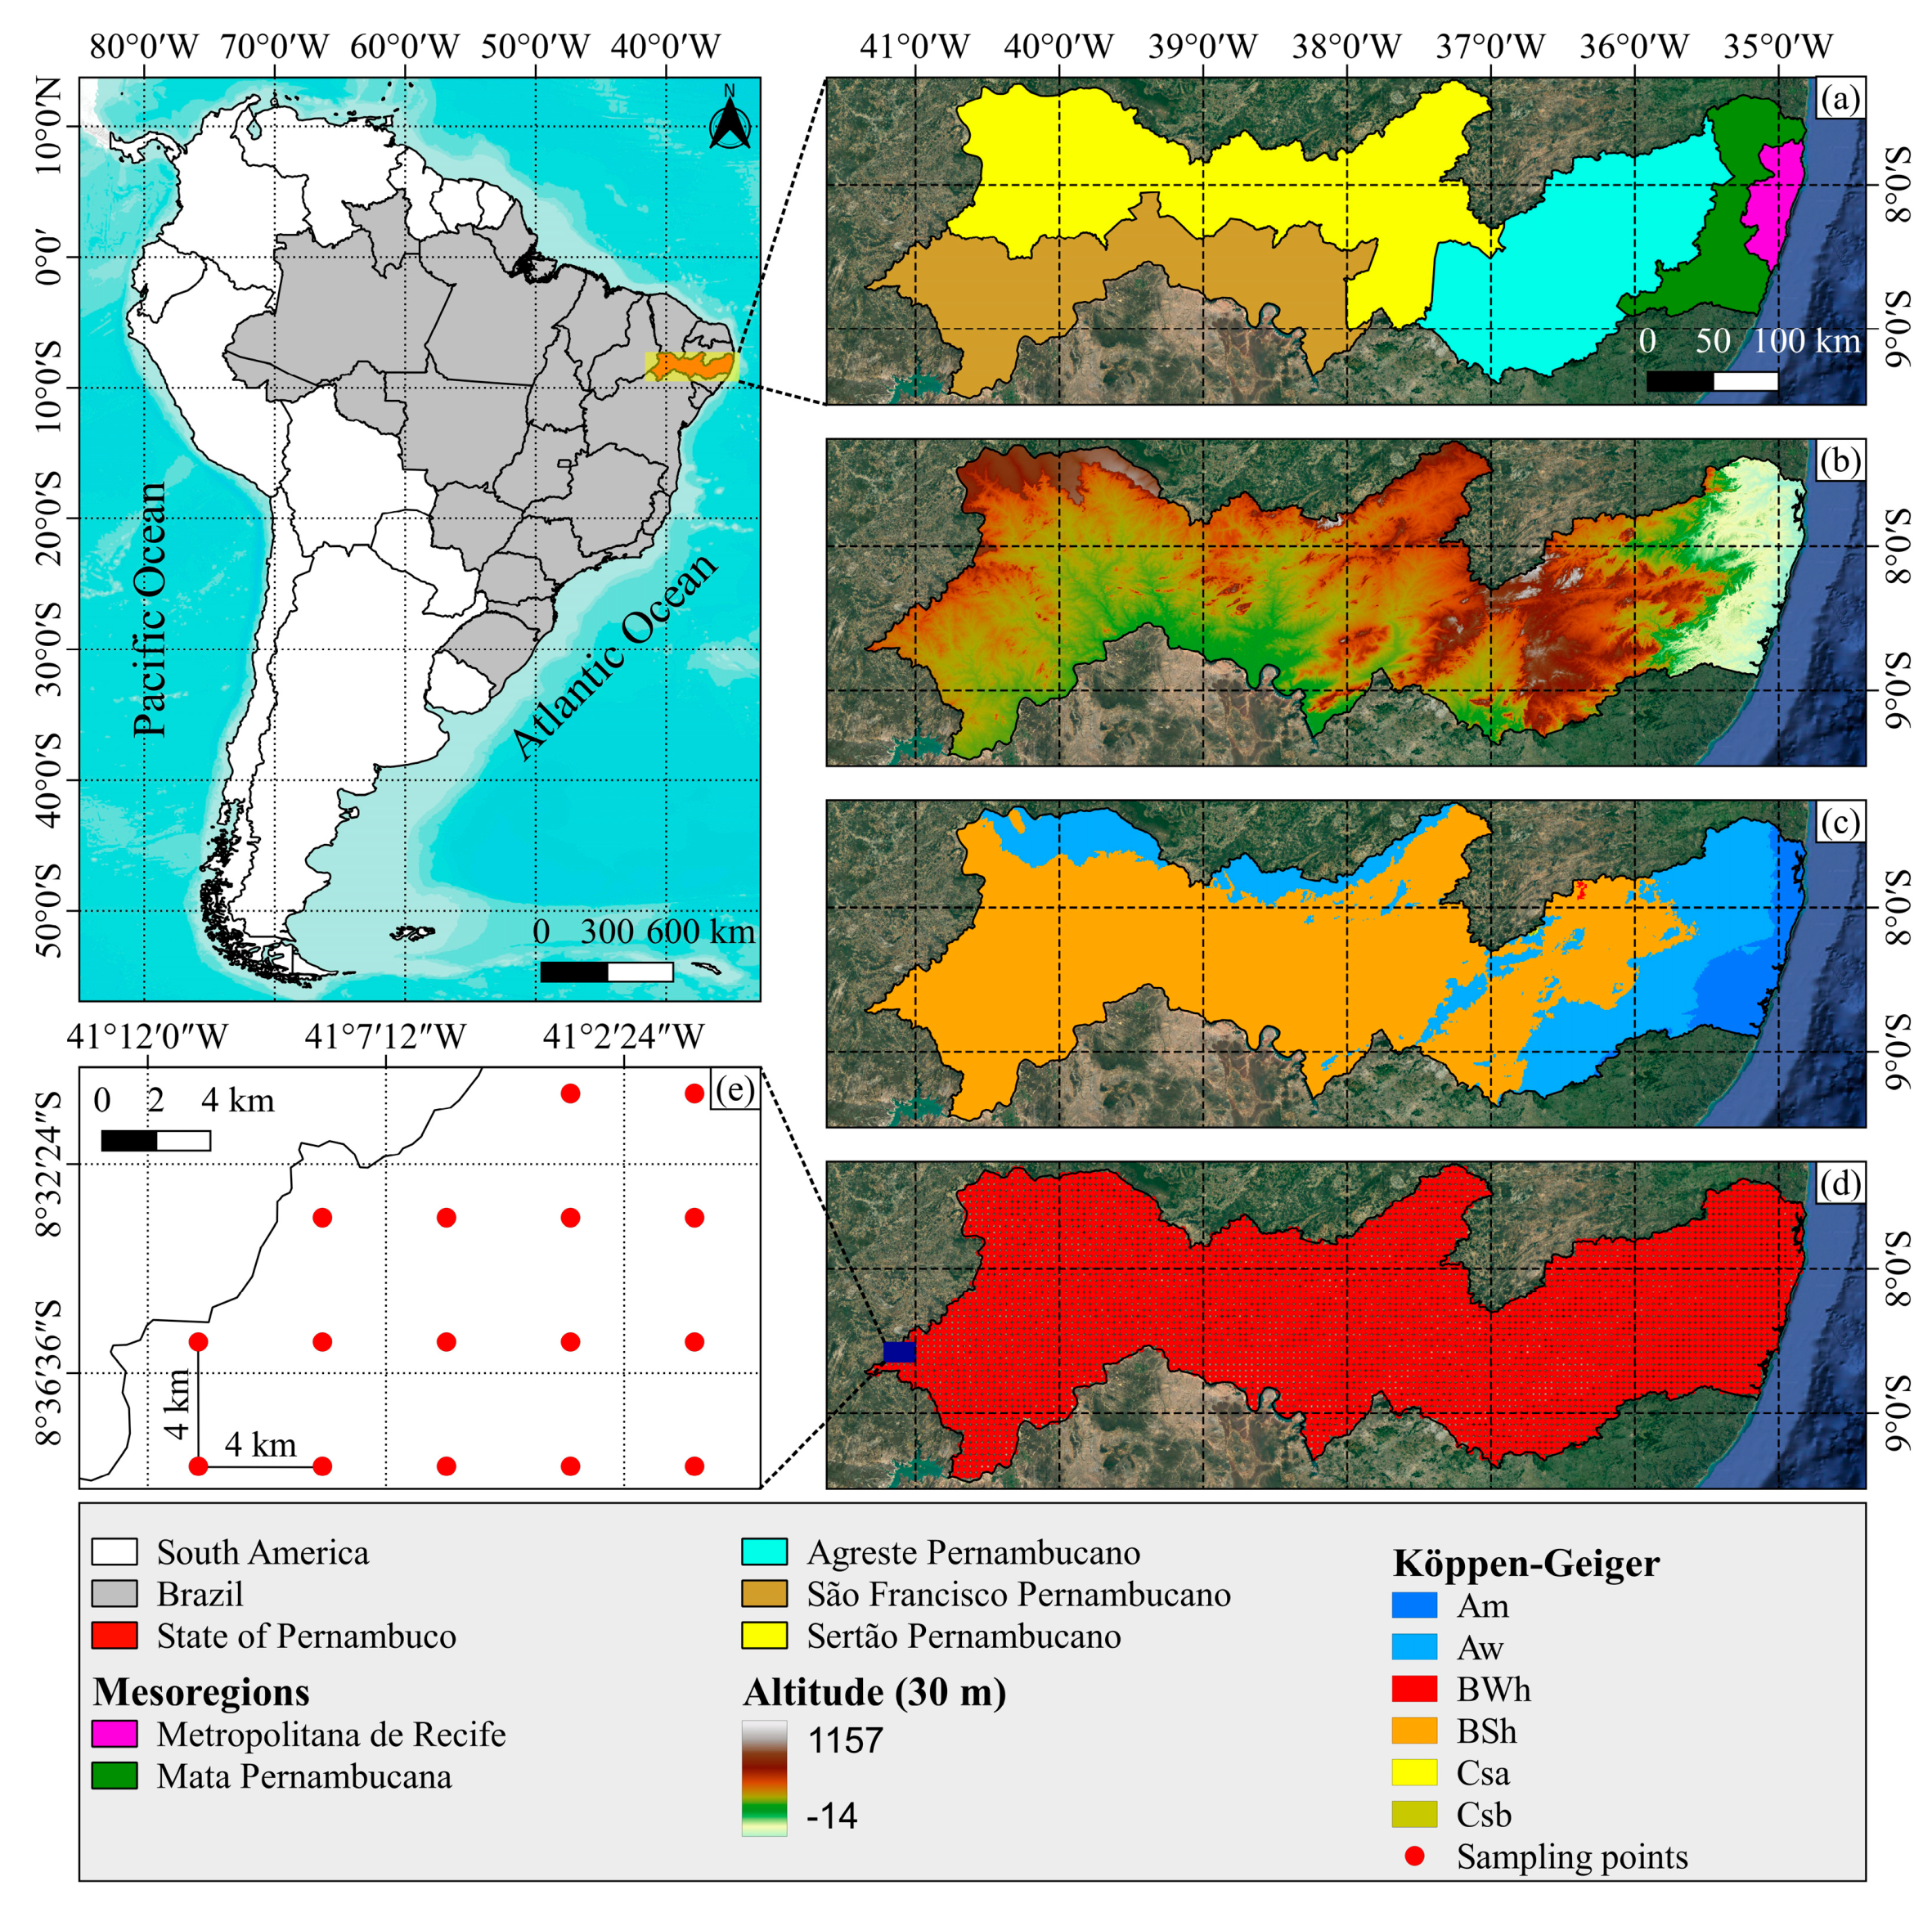 Animals Free Full-Text Bioclimatic Zoning for Sheep Farming through Geostatistical Modeling in the State of Pernambuco, Brazil